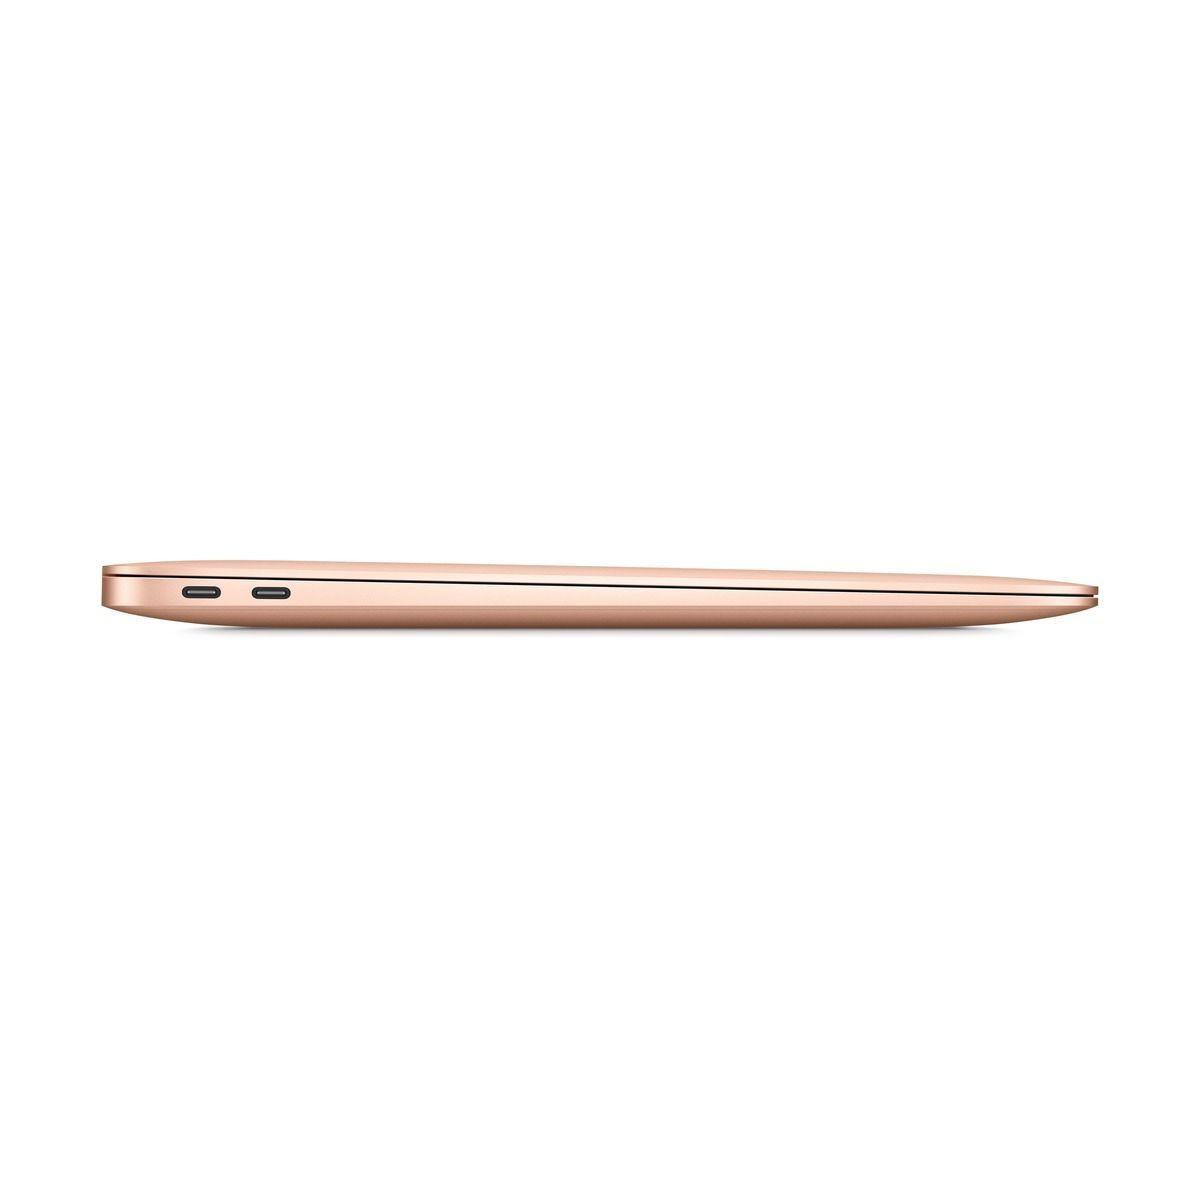 Selected image for APPLE Laptop MacBook Air 13.3" WQHD Retina M1 8GB 256GB SSD Backlit FP rose gold